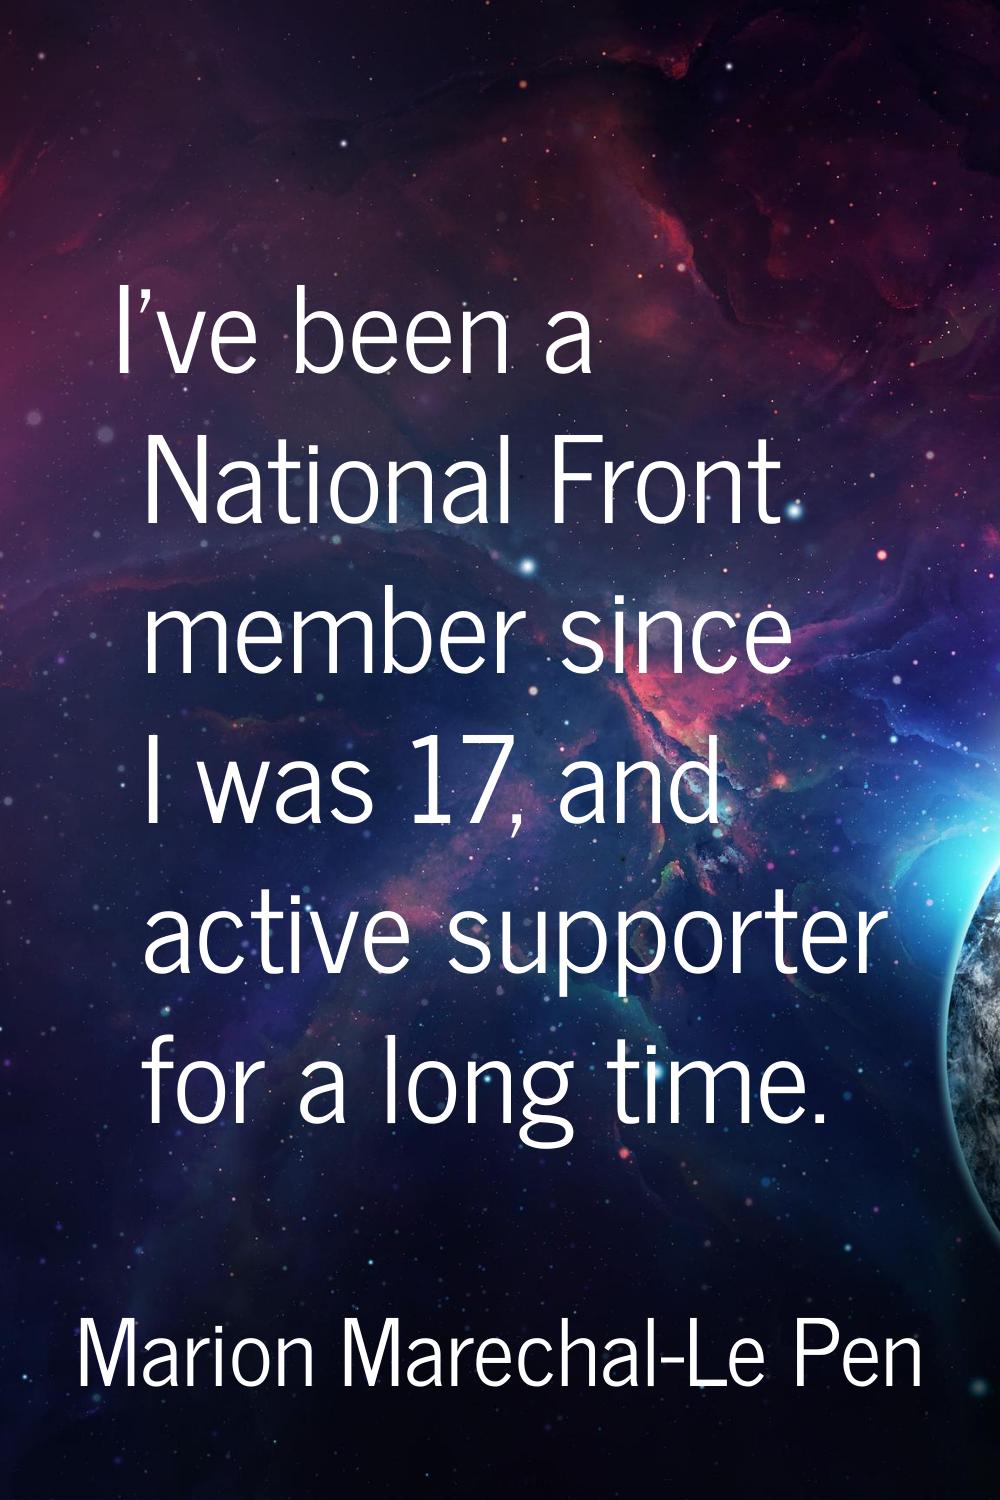 I've been a National Front member since I was 17, and active supporter for a long time.